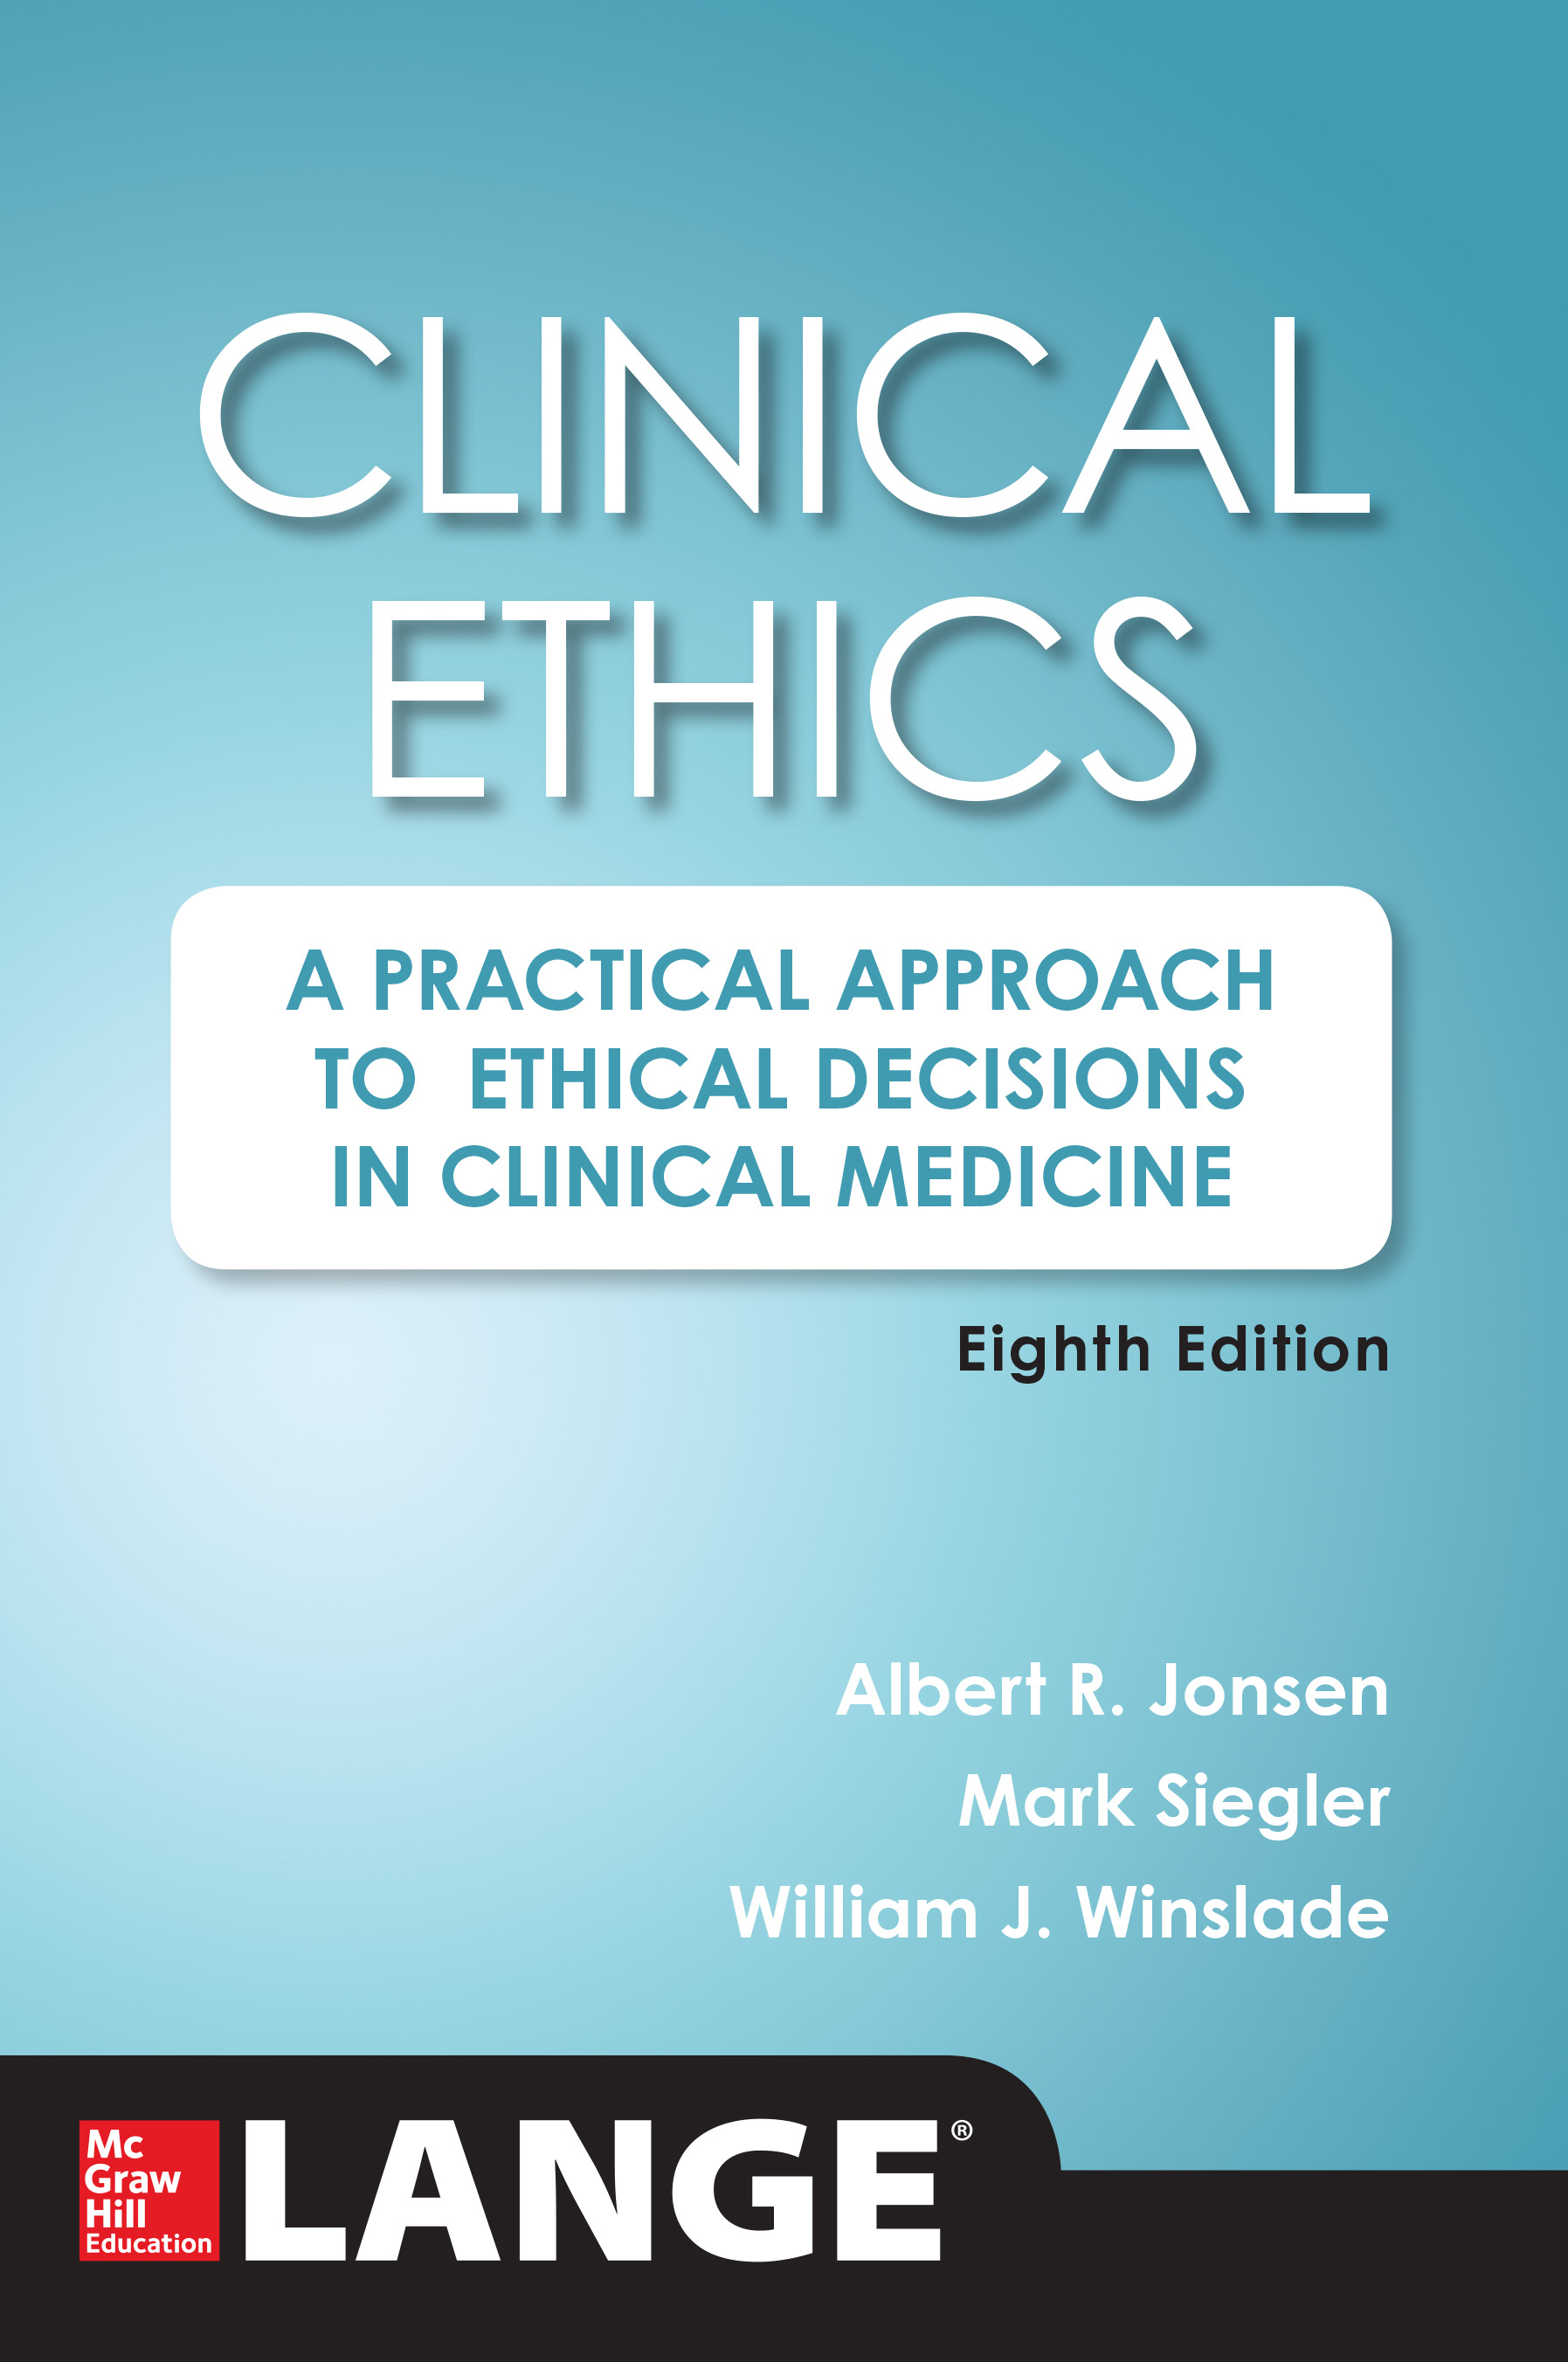 Clinical Ethics: A Practical Approach to Ethical Decisions in Clinical Medicine, 8e